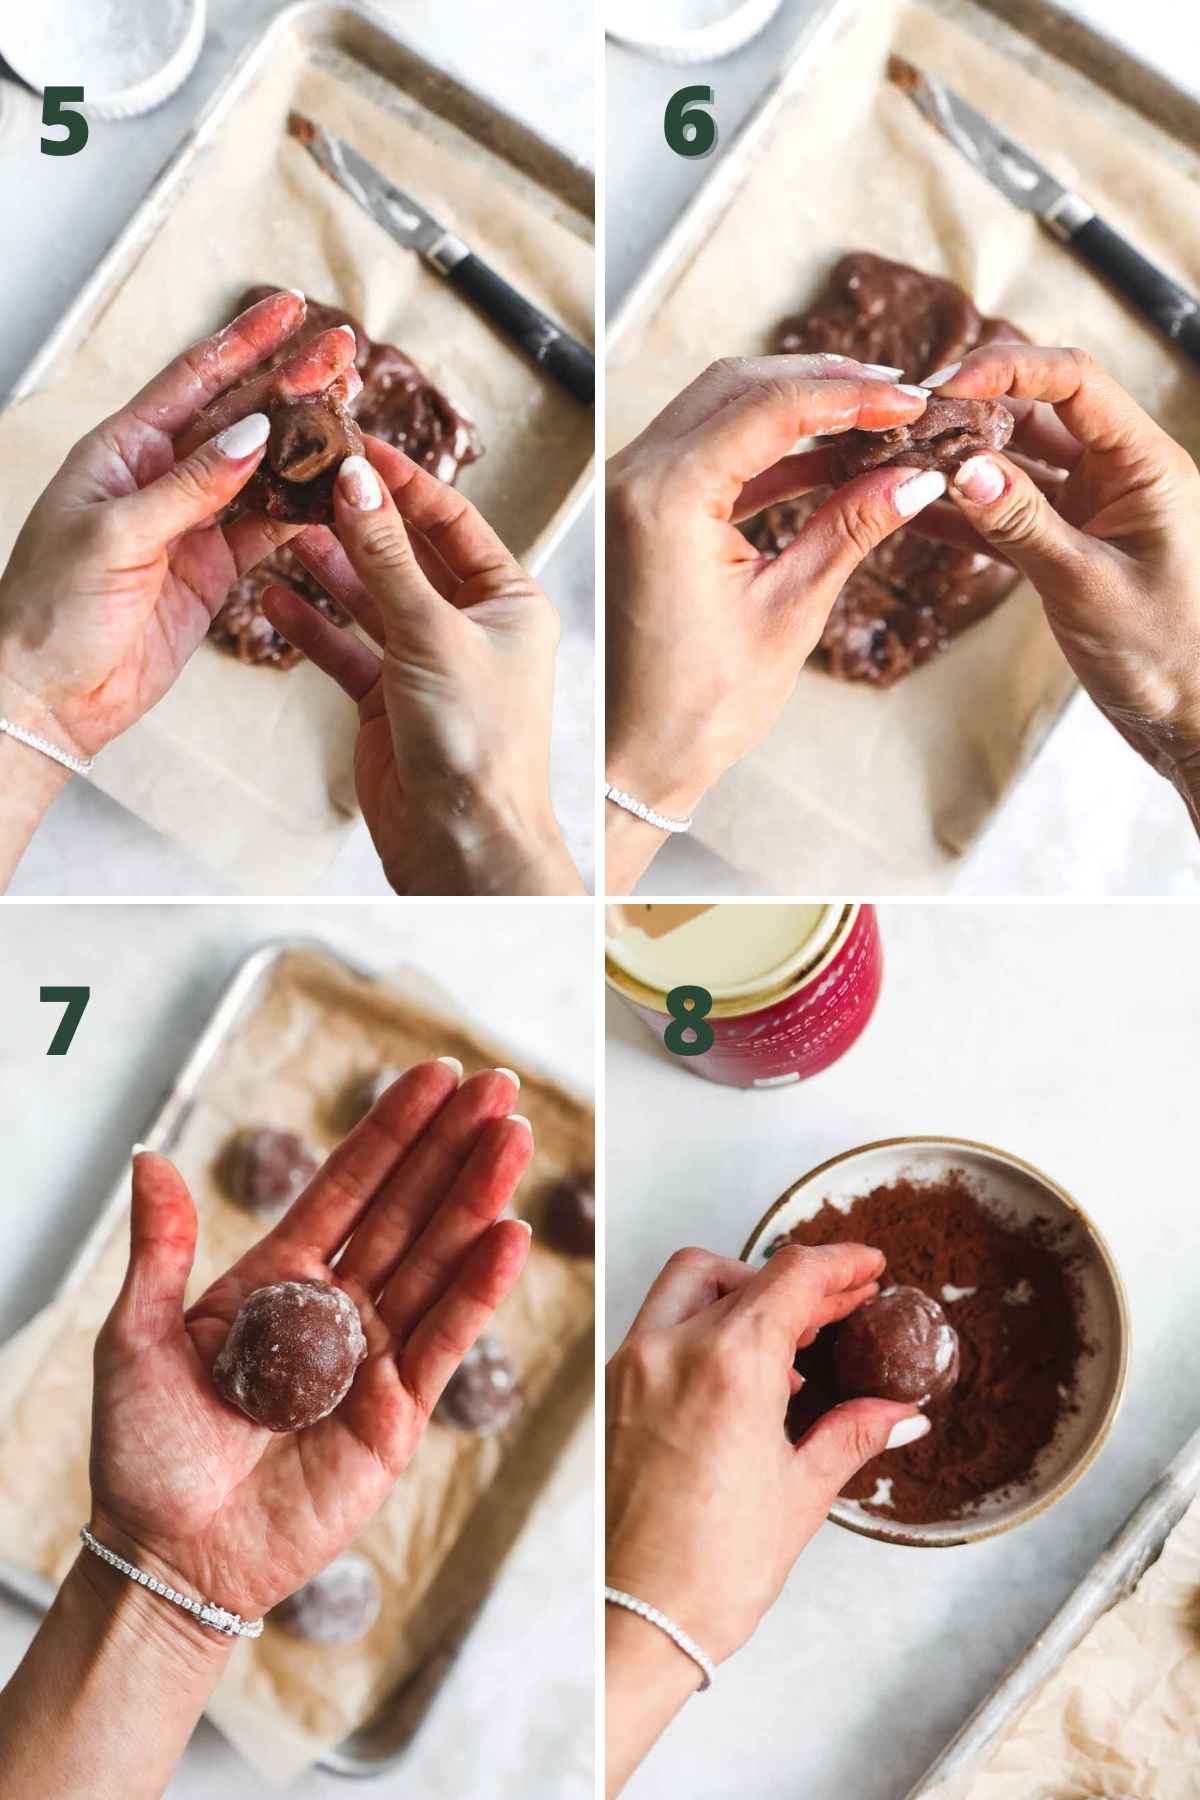 Steps to make chocolate truffle mochi, including stretching out the mochi, adding a chocolate truffle in the center, closing the mochi, and dusting it with cocoa powder.